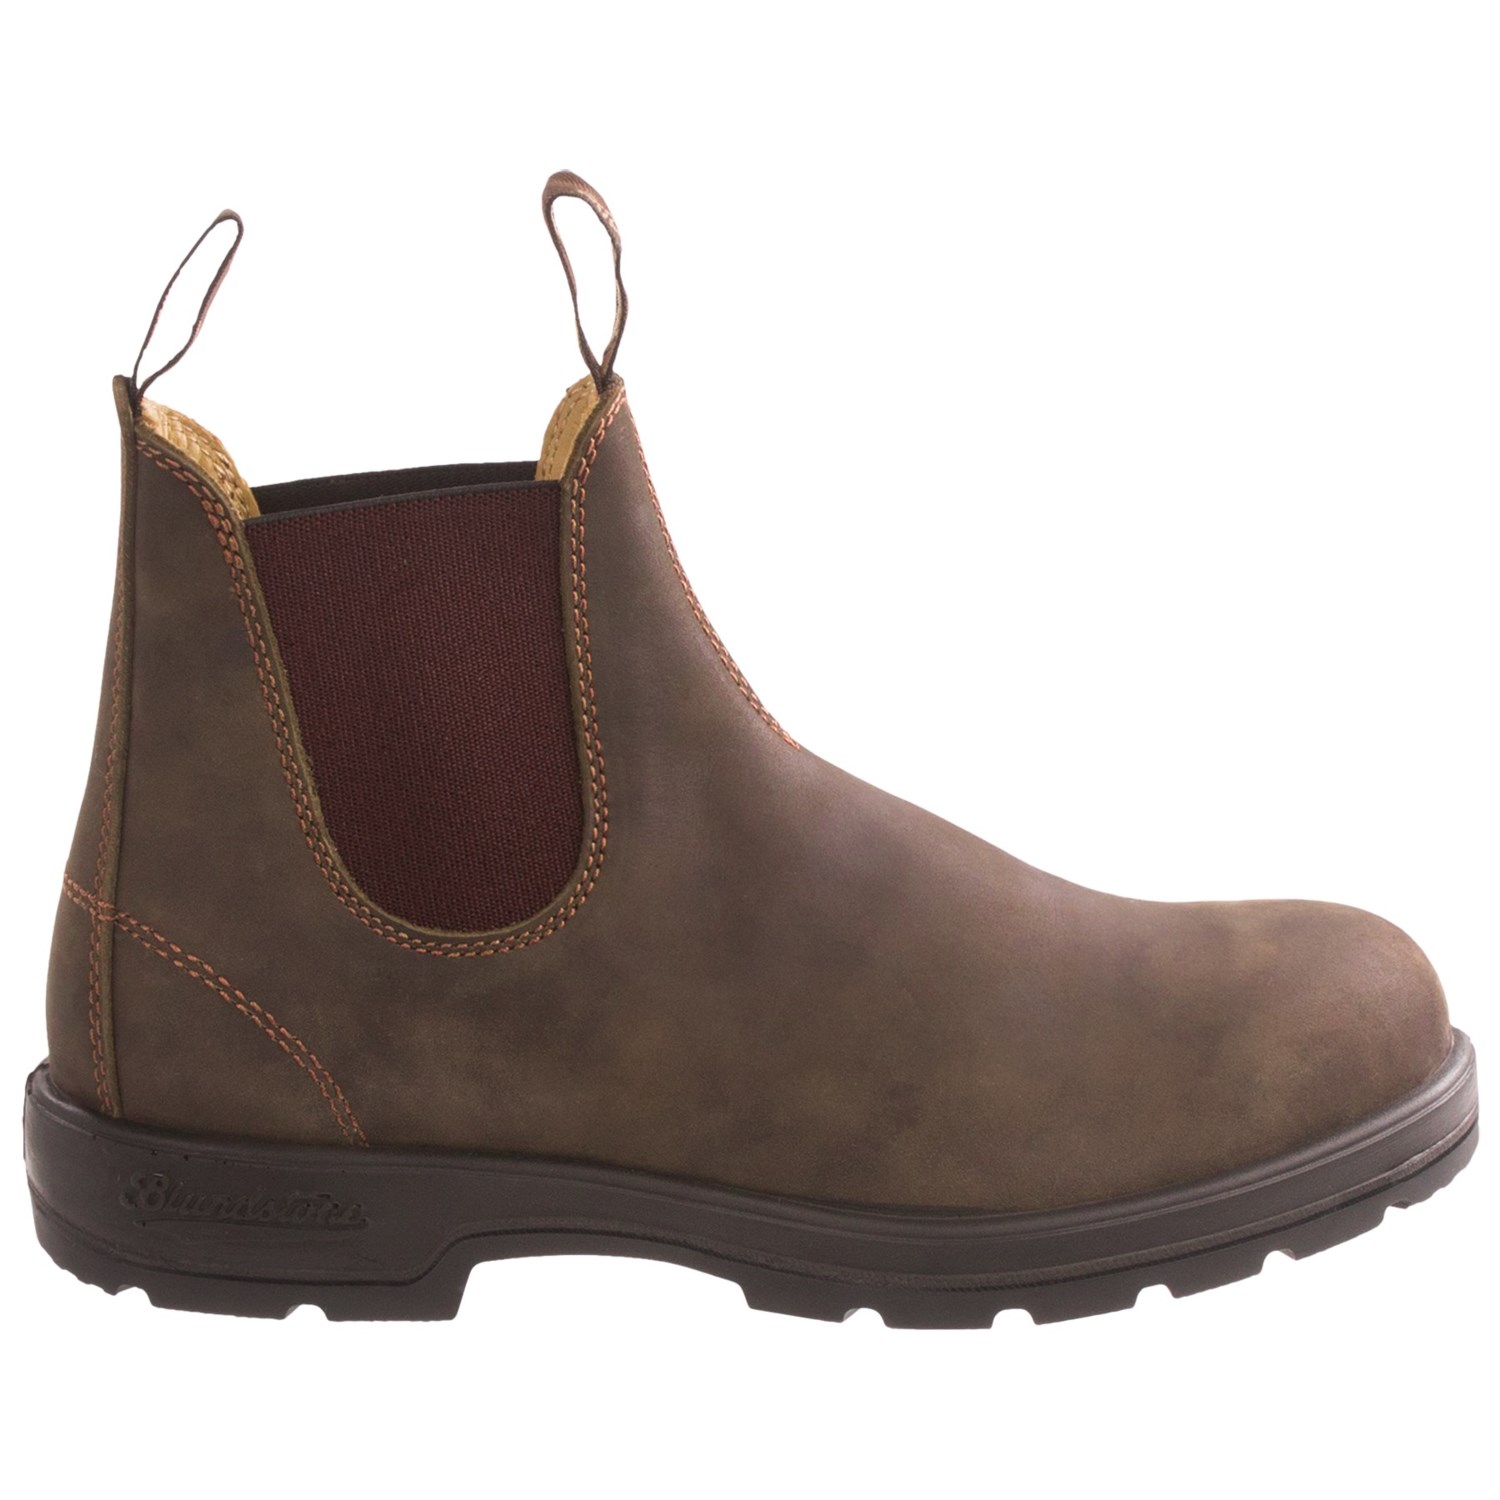 Blundstone 585 Pull-On Boots (For Men and Women) 7902M - Save 46%